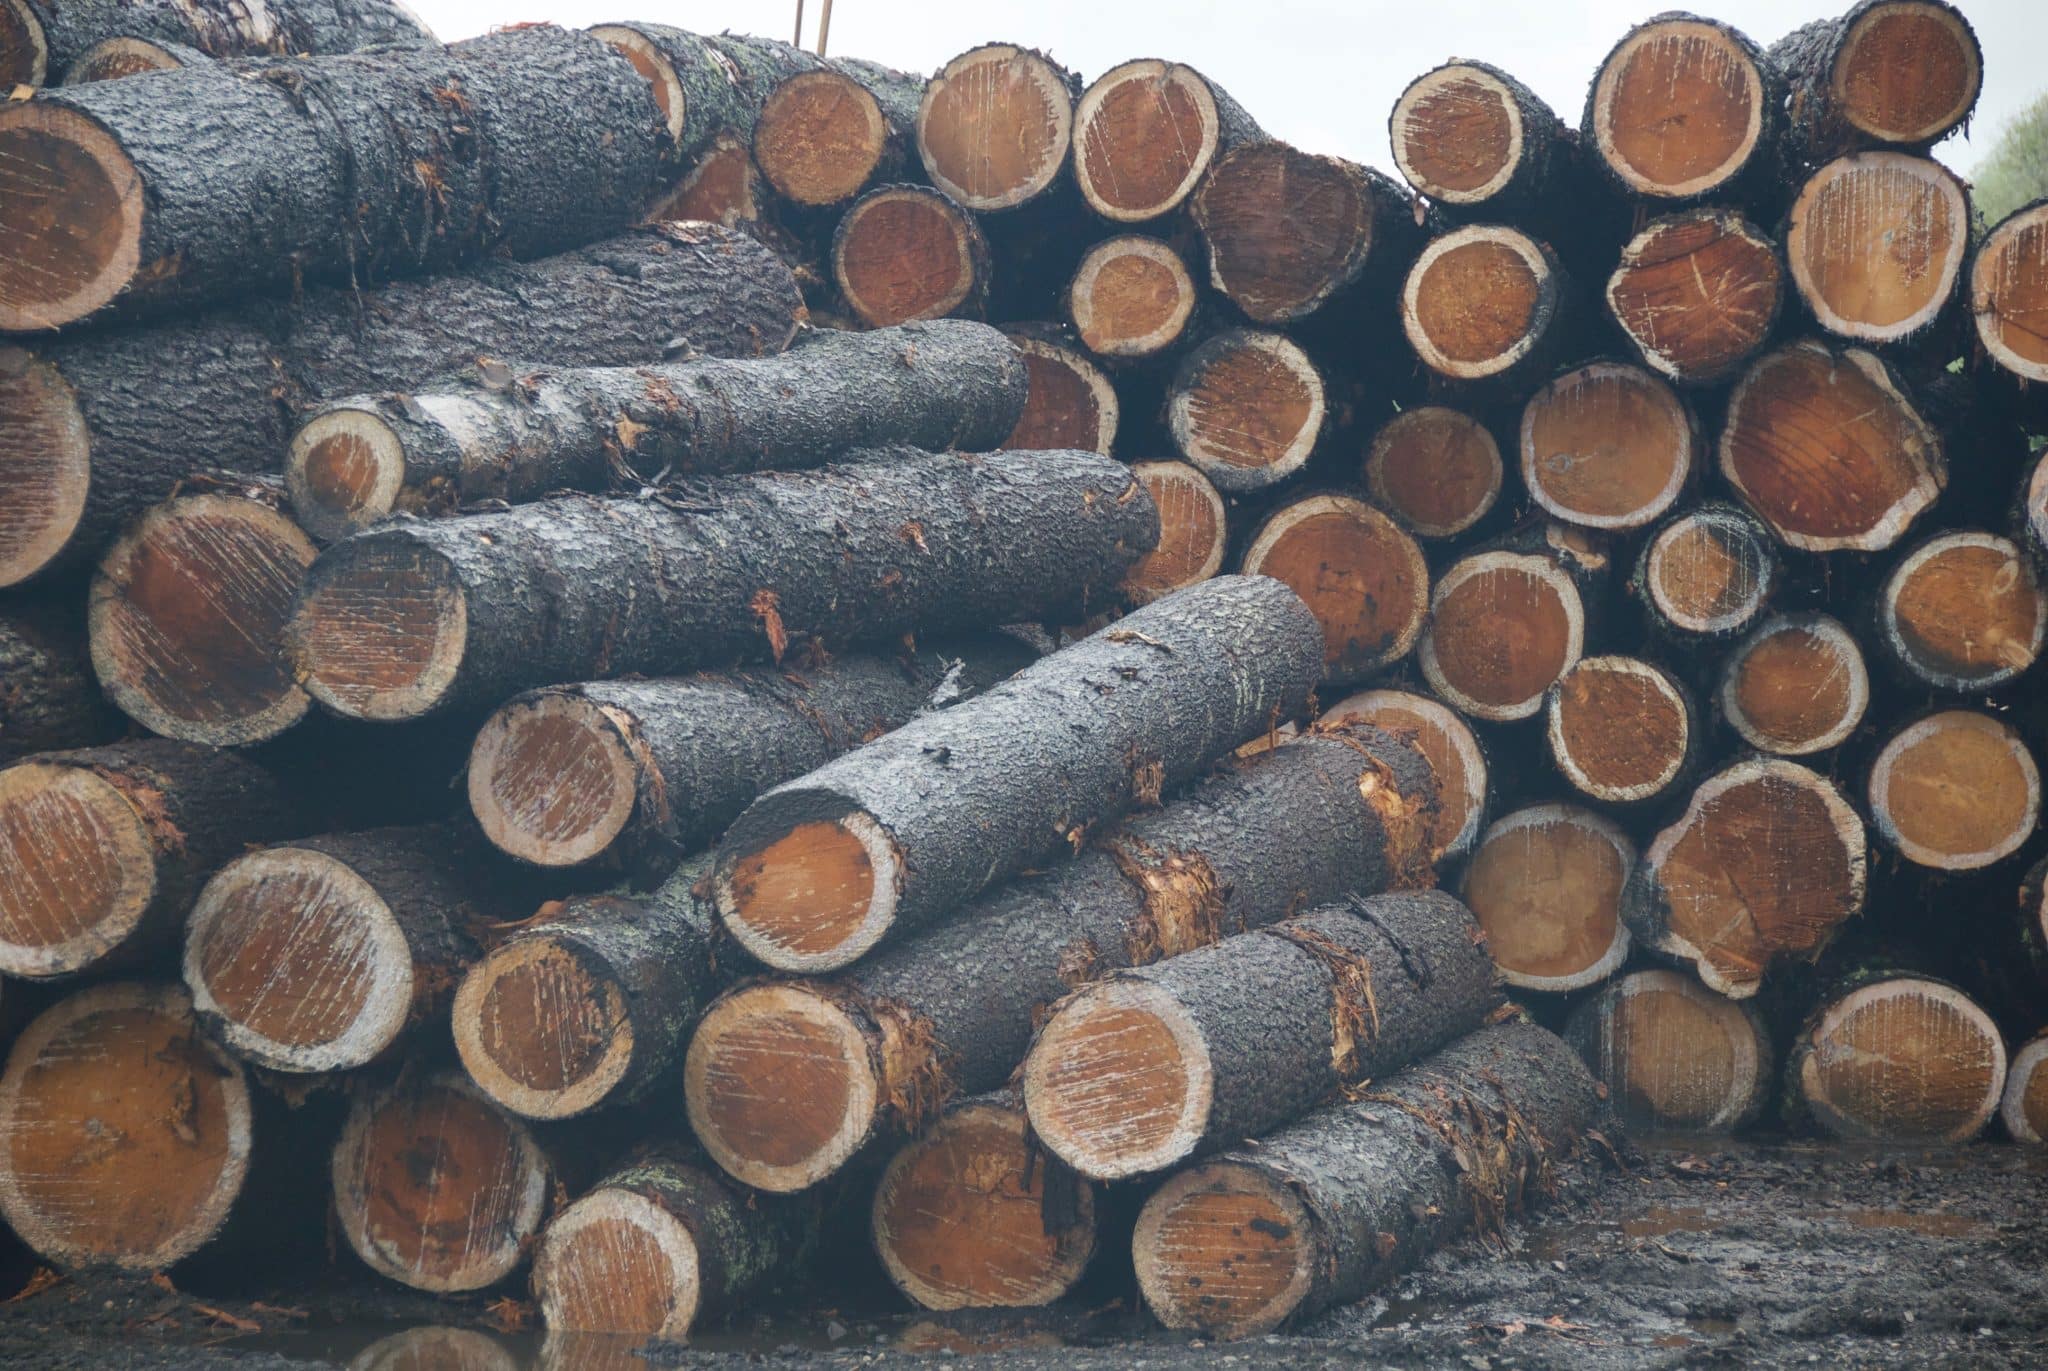 Moody’s: Outlook for forest sector turns positive, boosted by timber and wood products￼￼